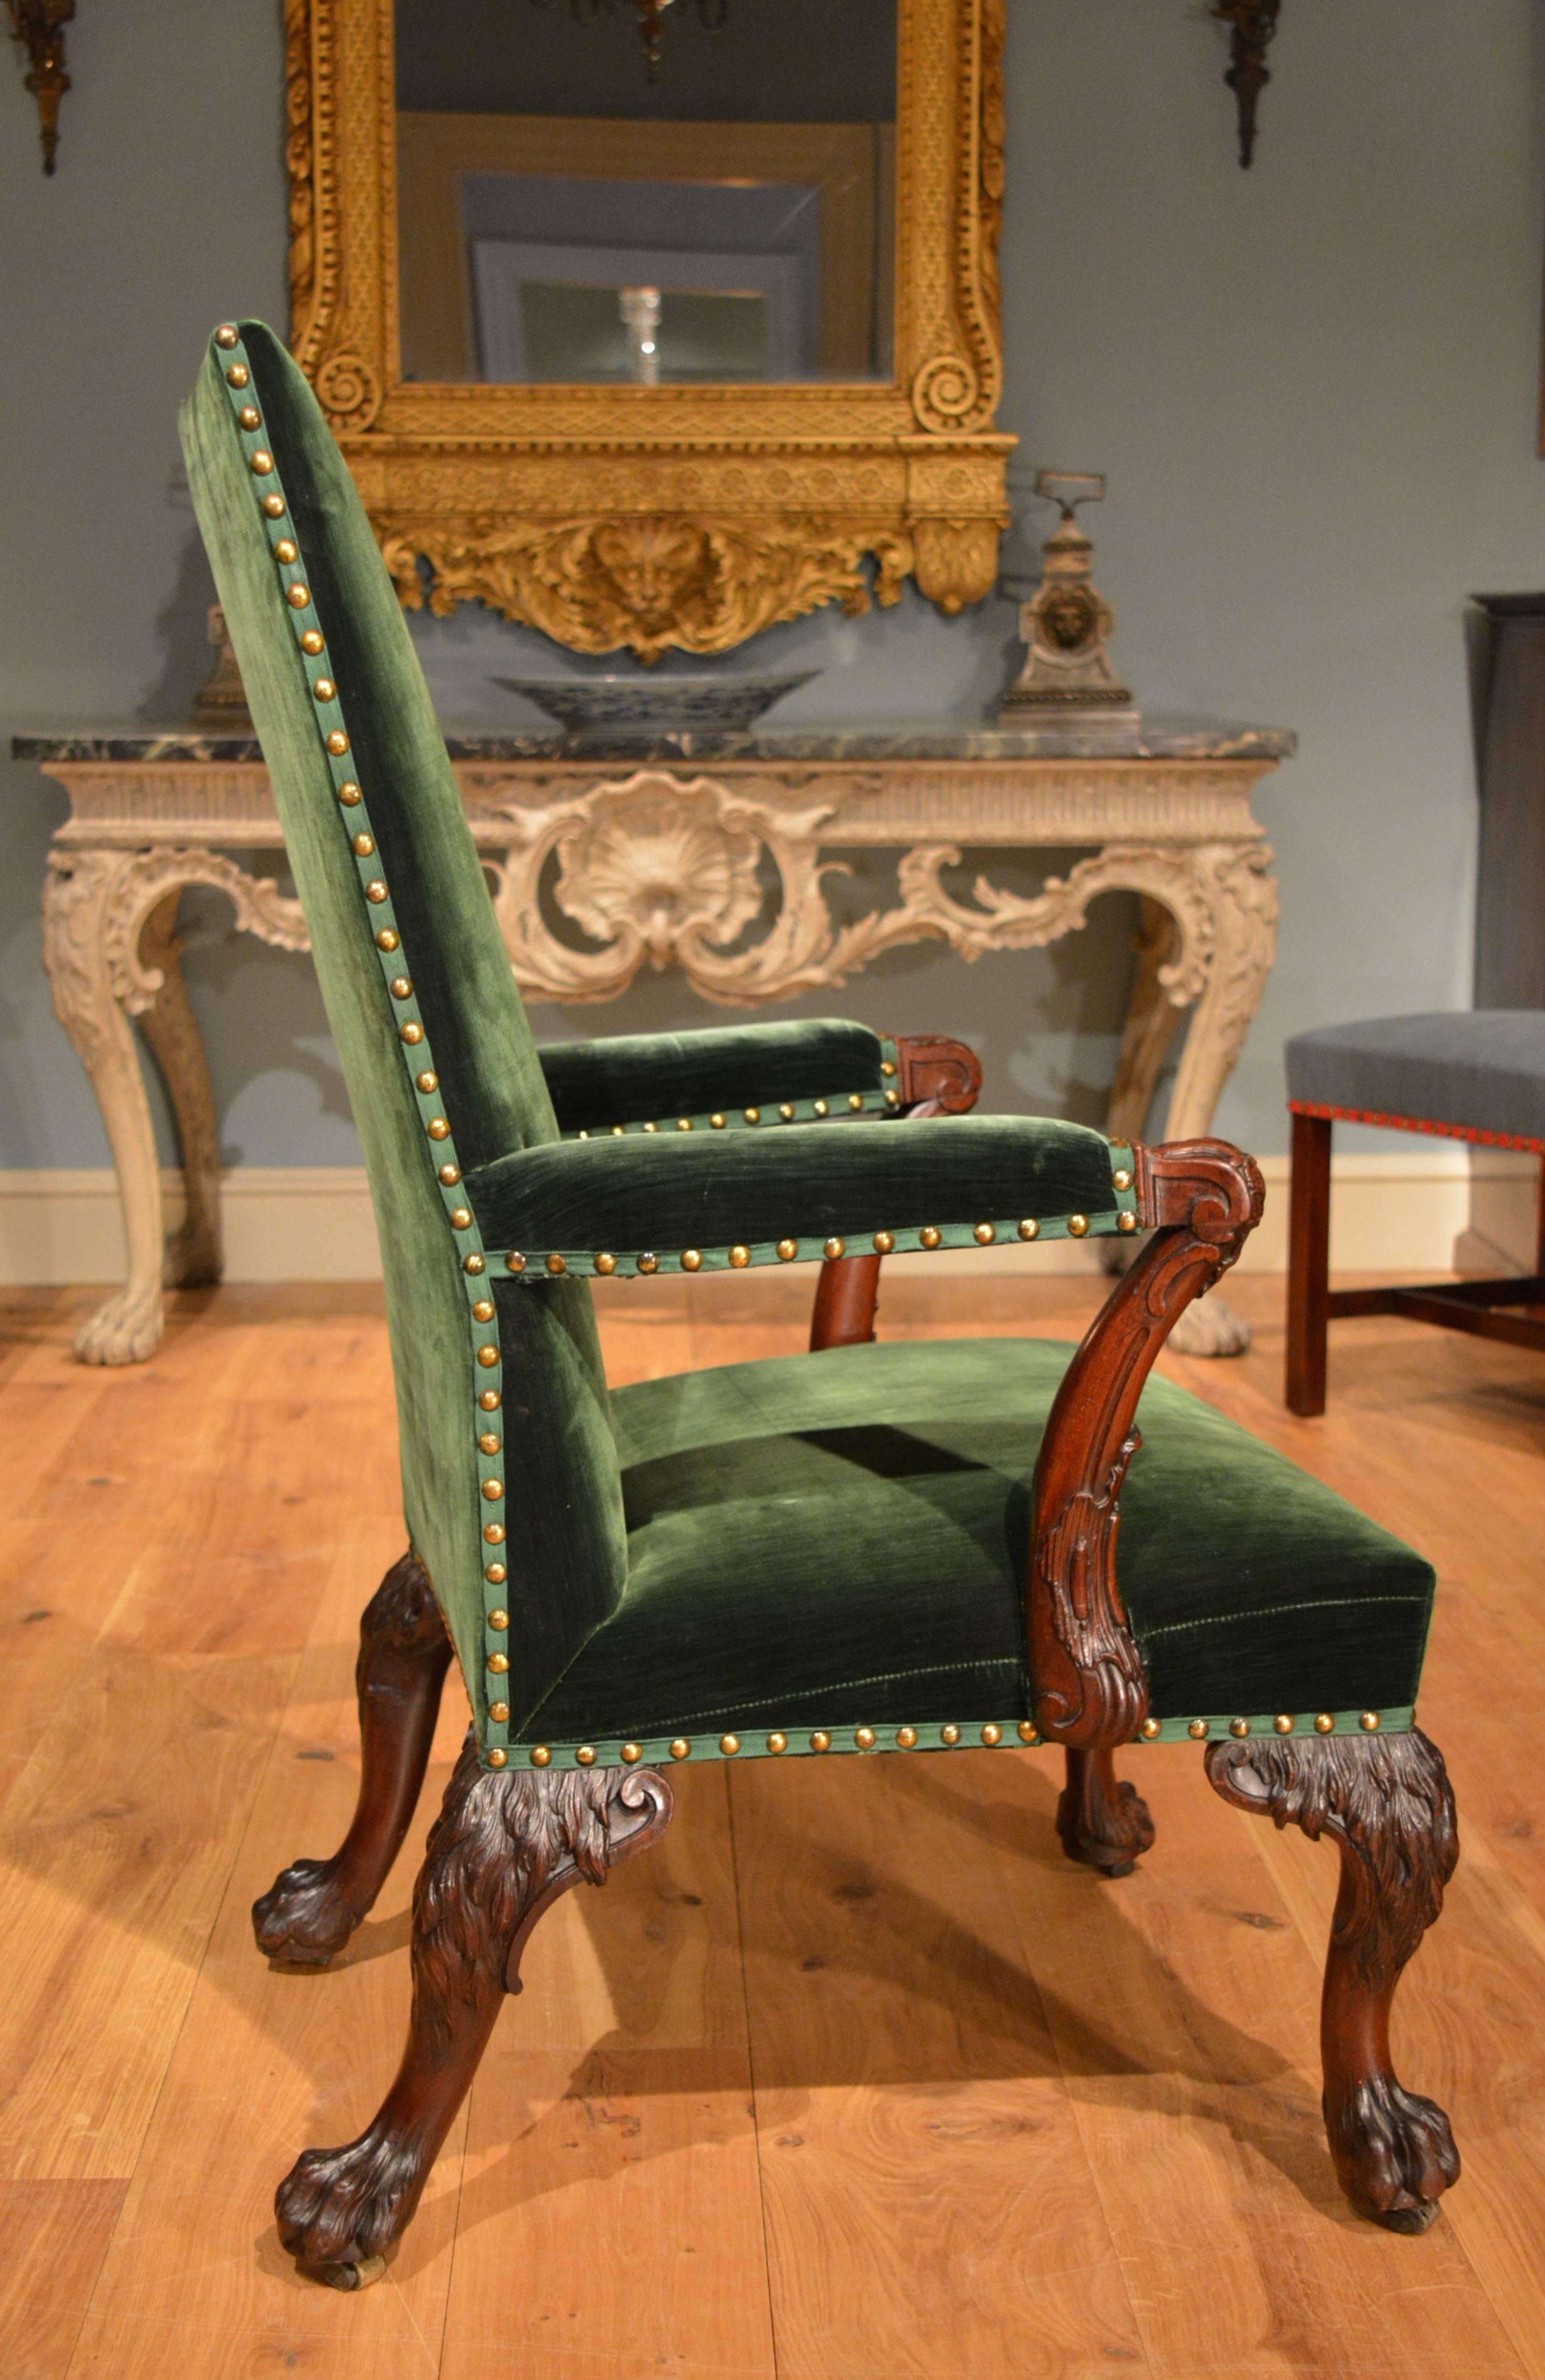 A George II finely carved mahogany armchair, the arms ending in cabochons, below which is stylised leafage incorporating 'C' scrolls, with 'C' scrolls to the legs, which are carved with hairy knees and end in paw feet. The back legs are particularly